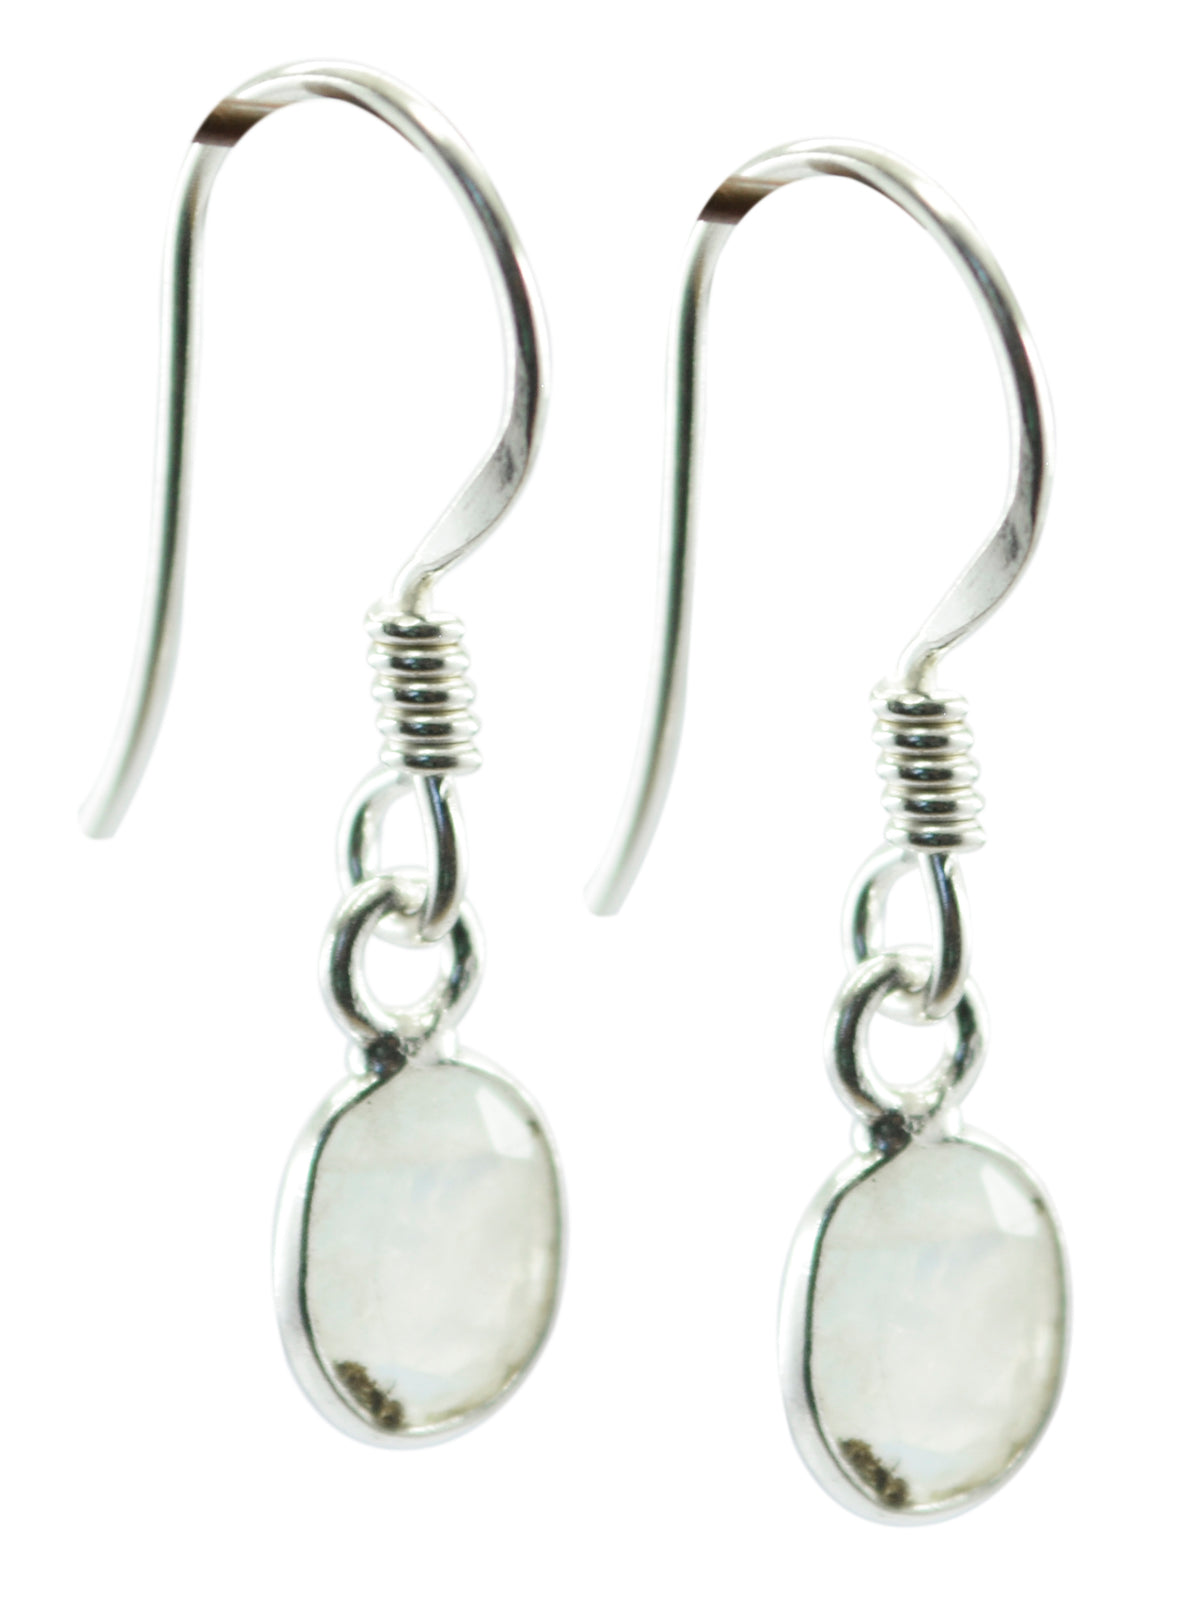 Riyo Genuine Gems round Faceted White Rainbow Moonstone Silver Earrings gift for boxing day